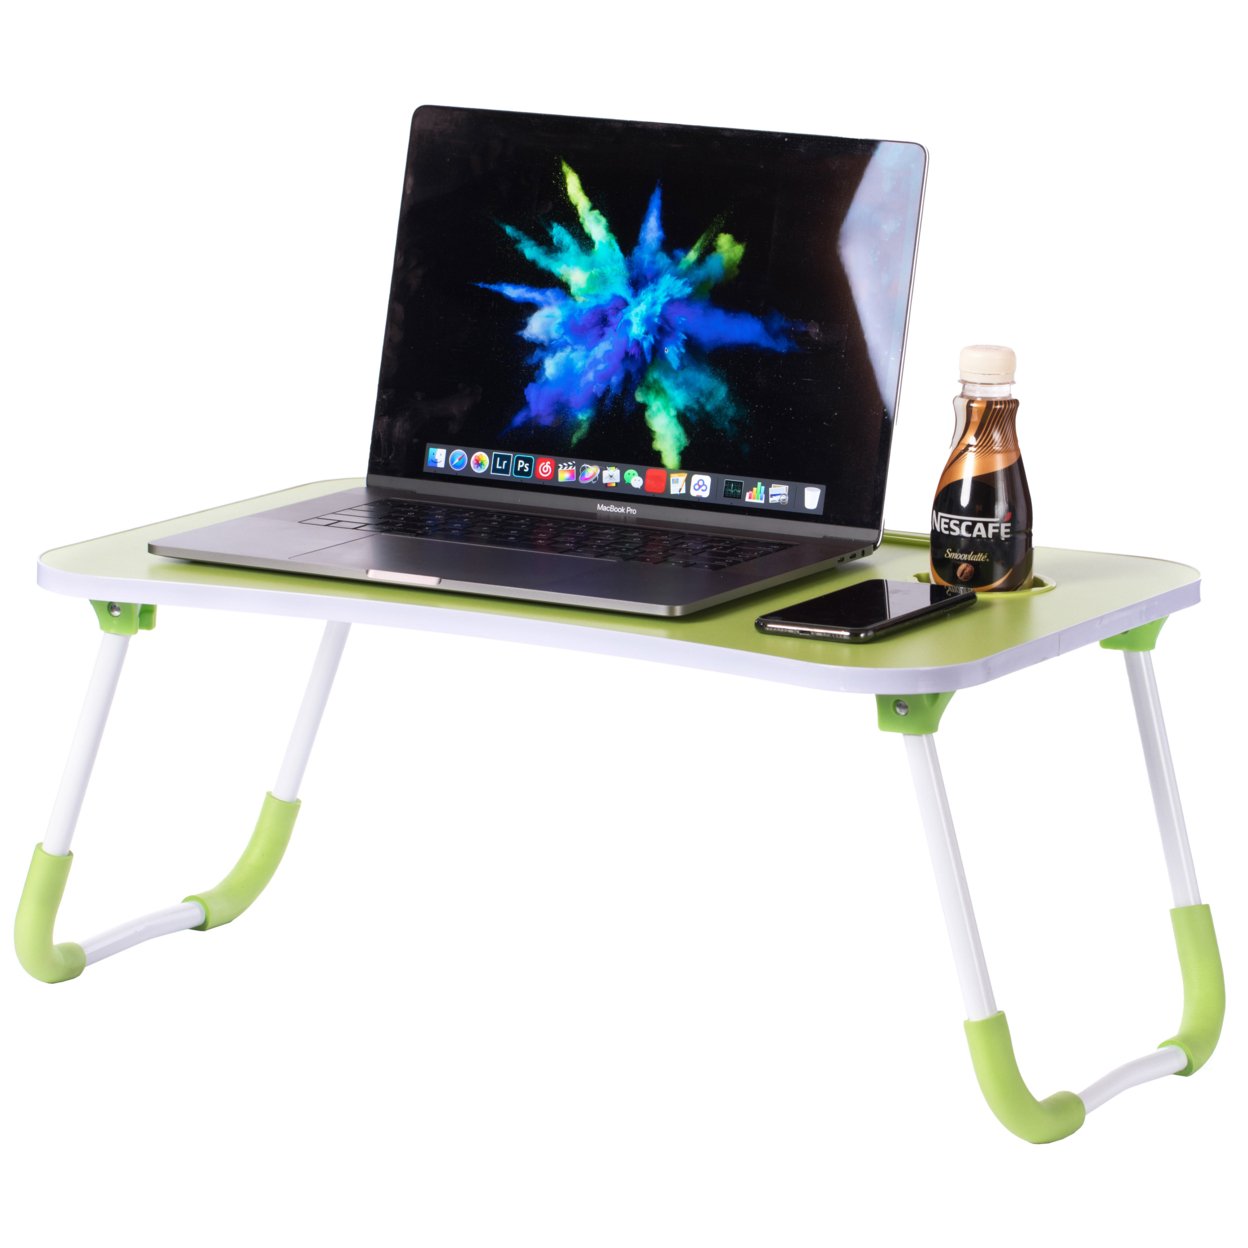 Basicwise Bed Tray Laptop Foldable Table Kids Lap Desk Homework Table